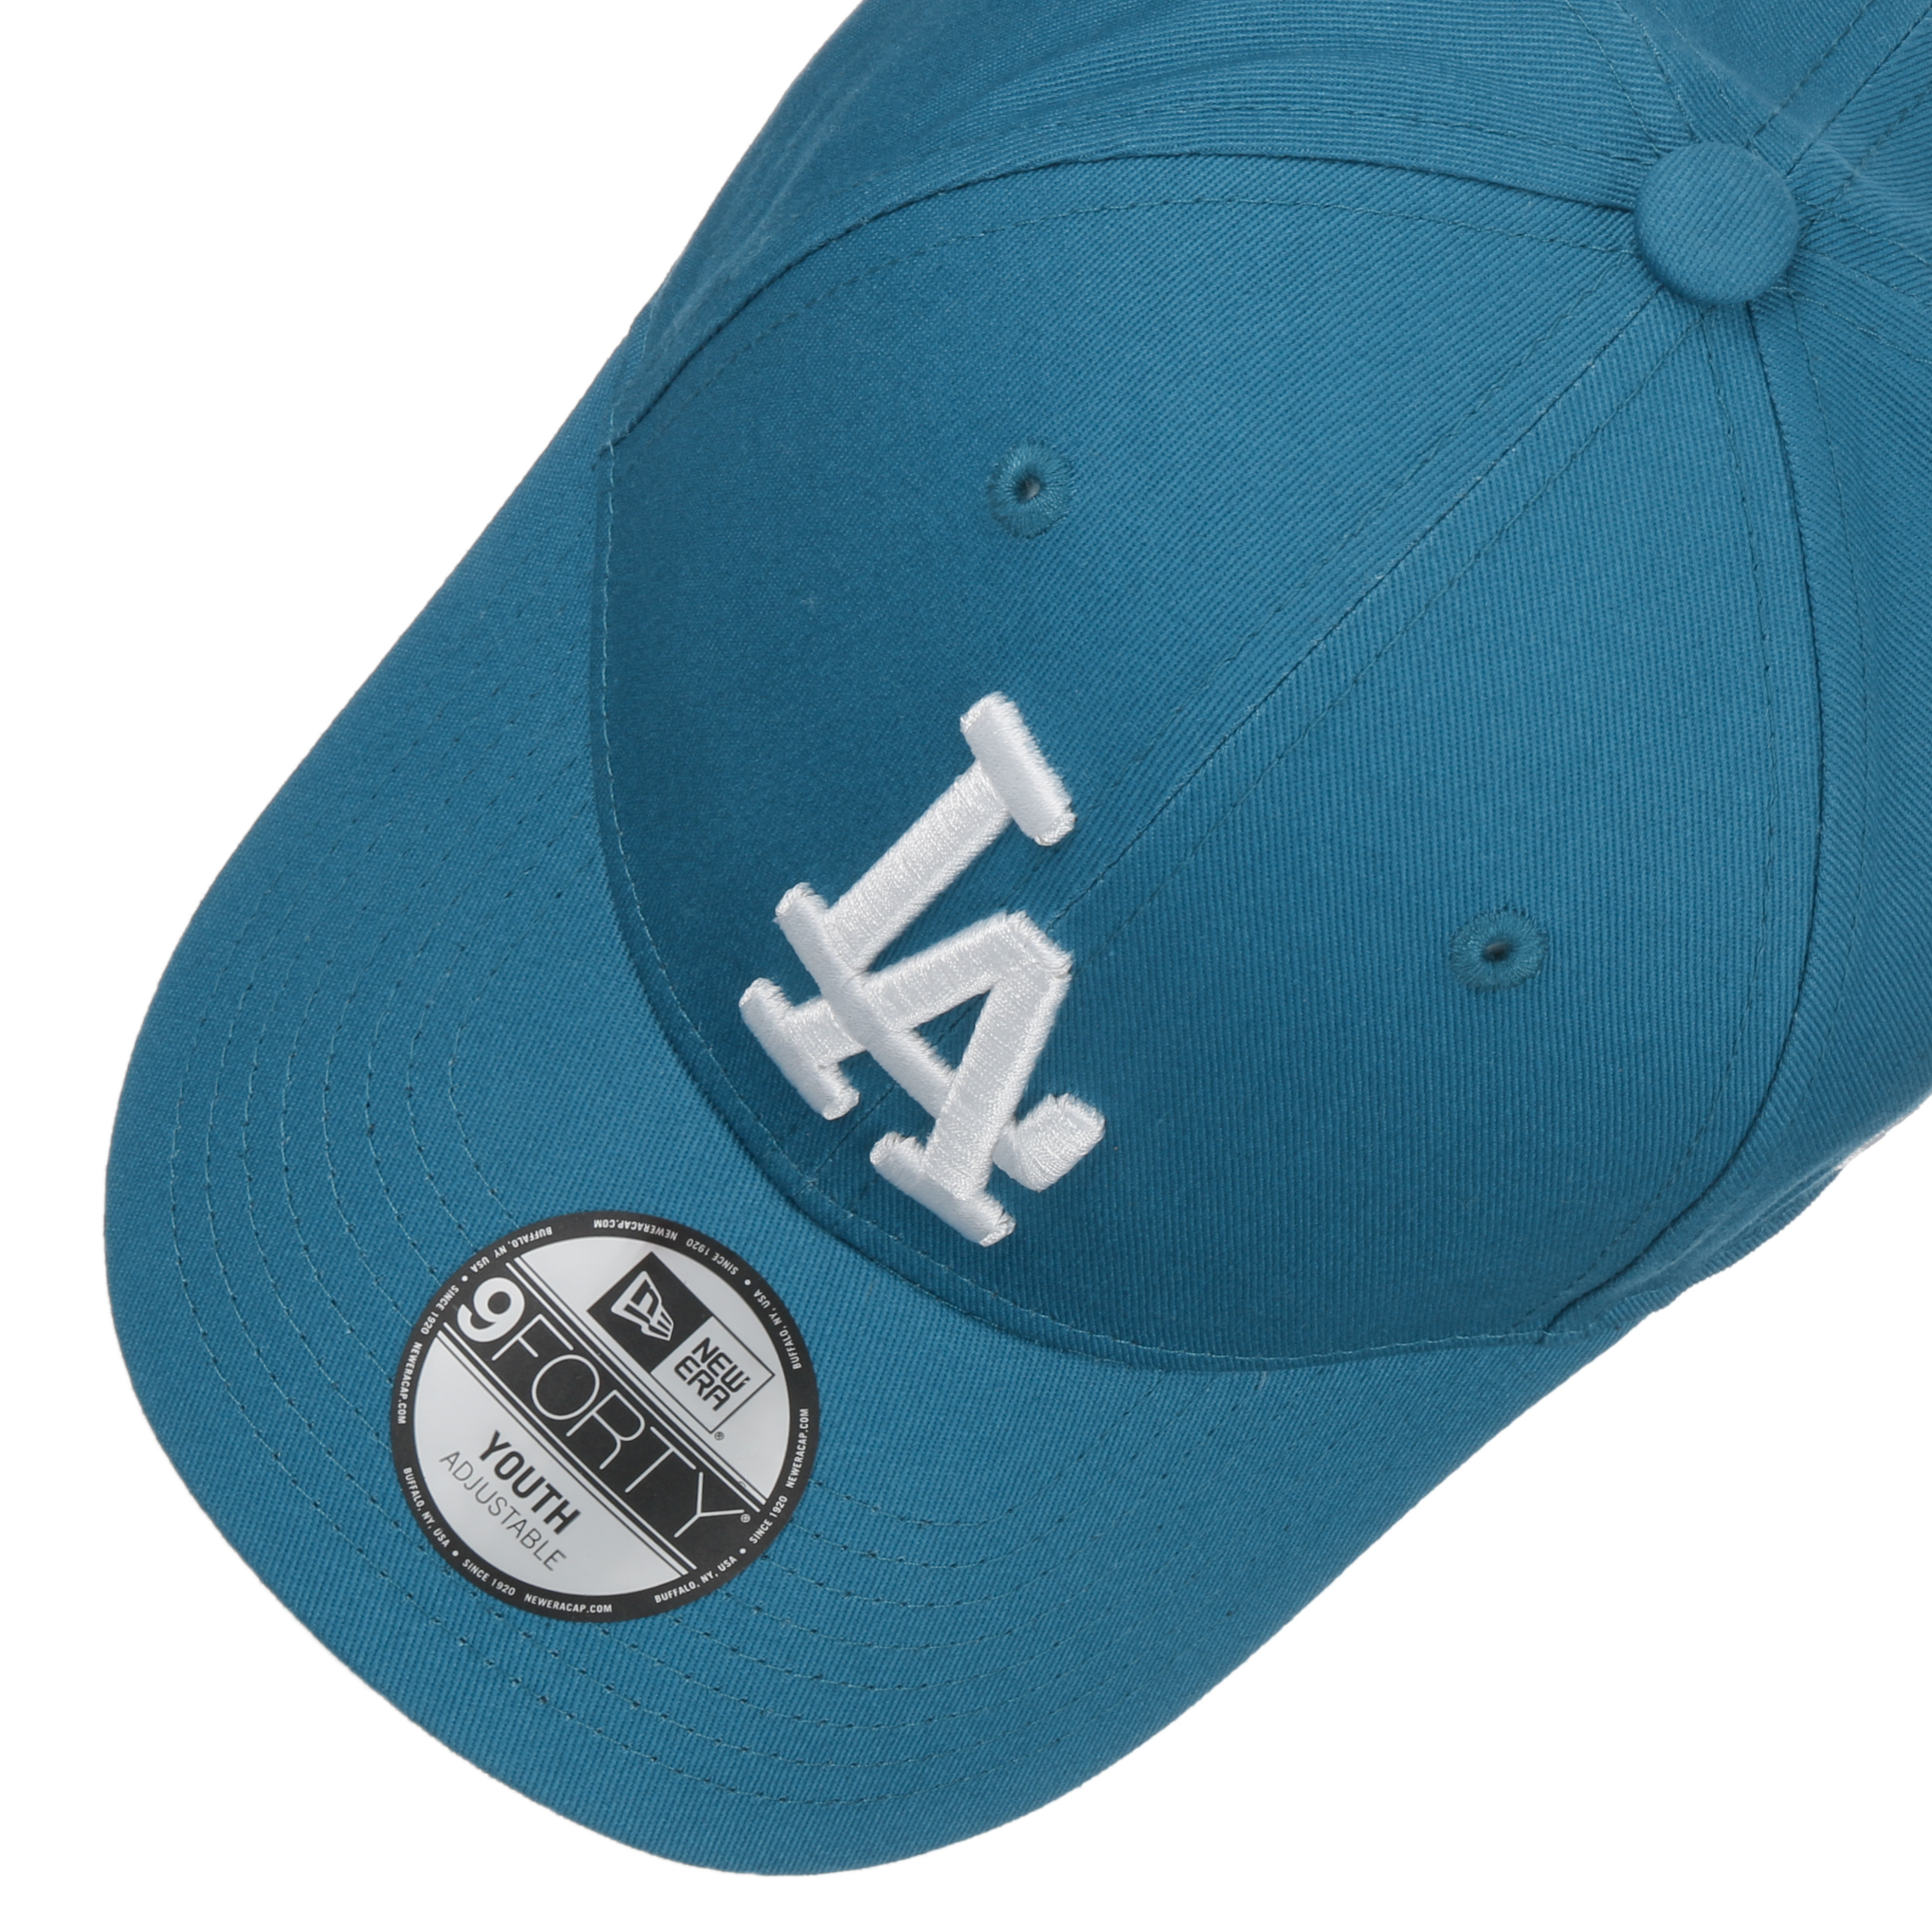 Los Angeles Dodgers New Era 9FORTY YOUTH Strap back Cap royal – JustFitteds